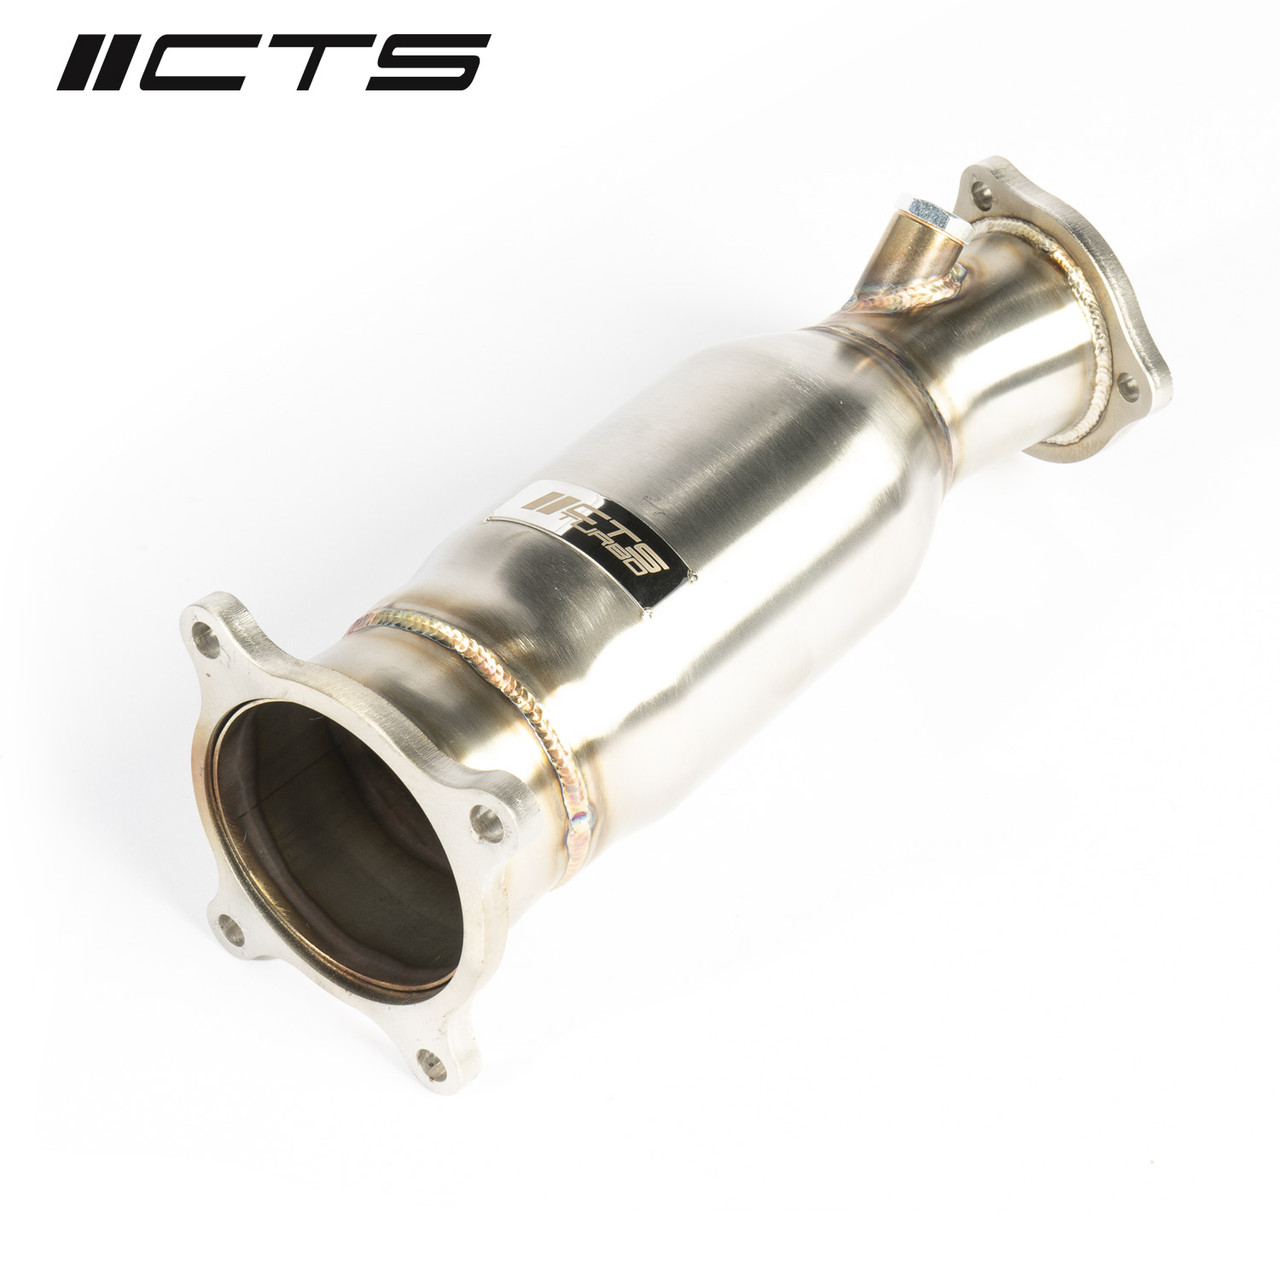 Cts Turbo B7 Audi A4 2 0t Test Pipe